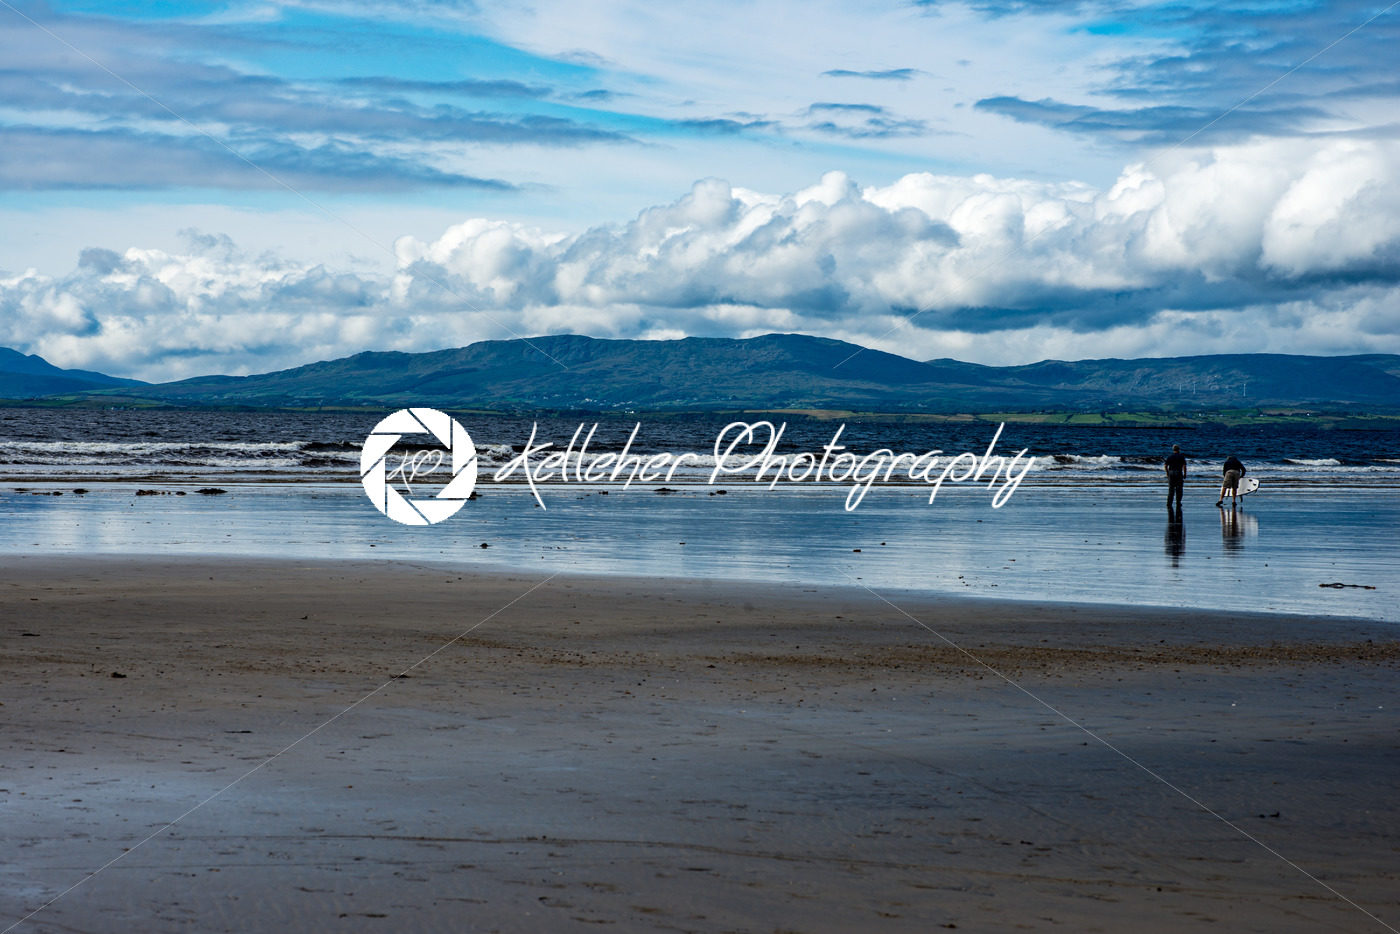 ROSSNOWLAGH, IRELAND – AUGUST 26, 2017: Rossnowlagh Beach, Donegal, Ireland, Europe - Kelleher Photography Store